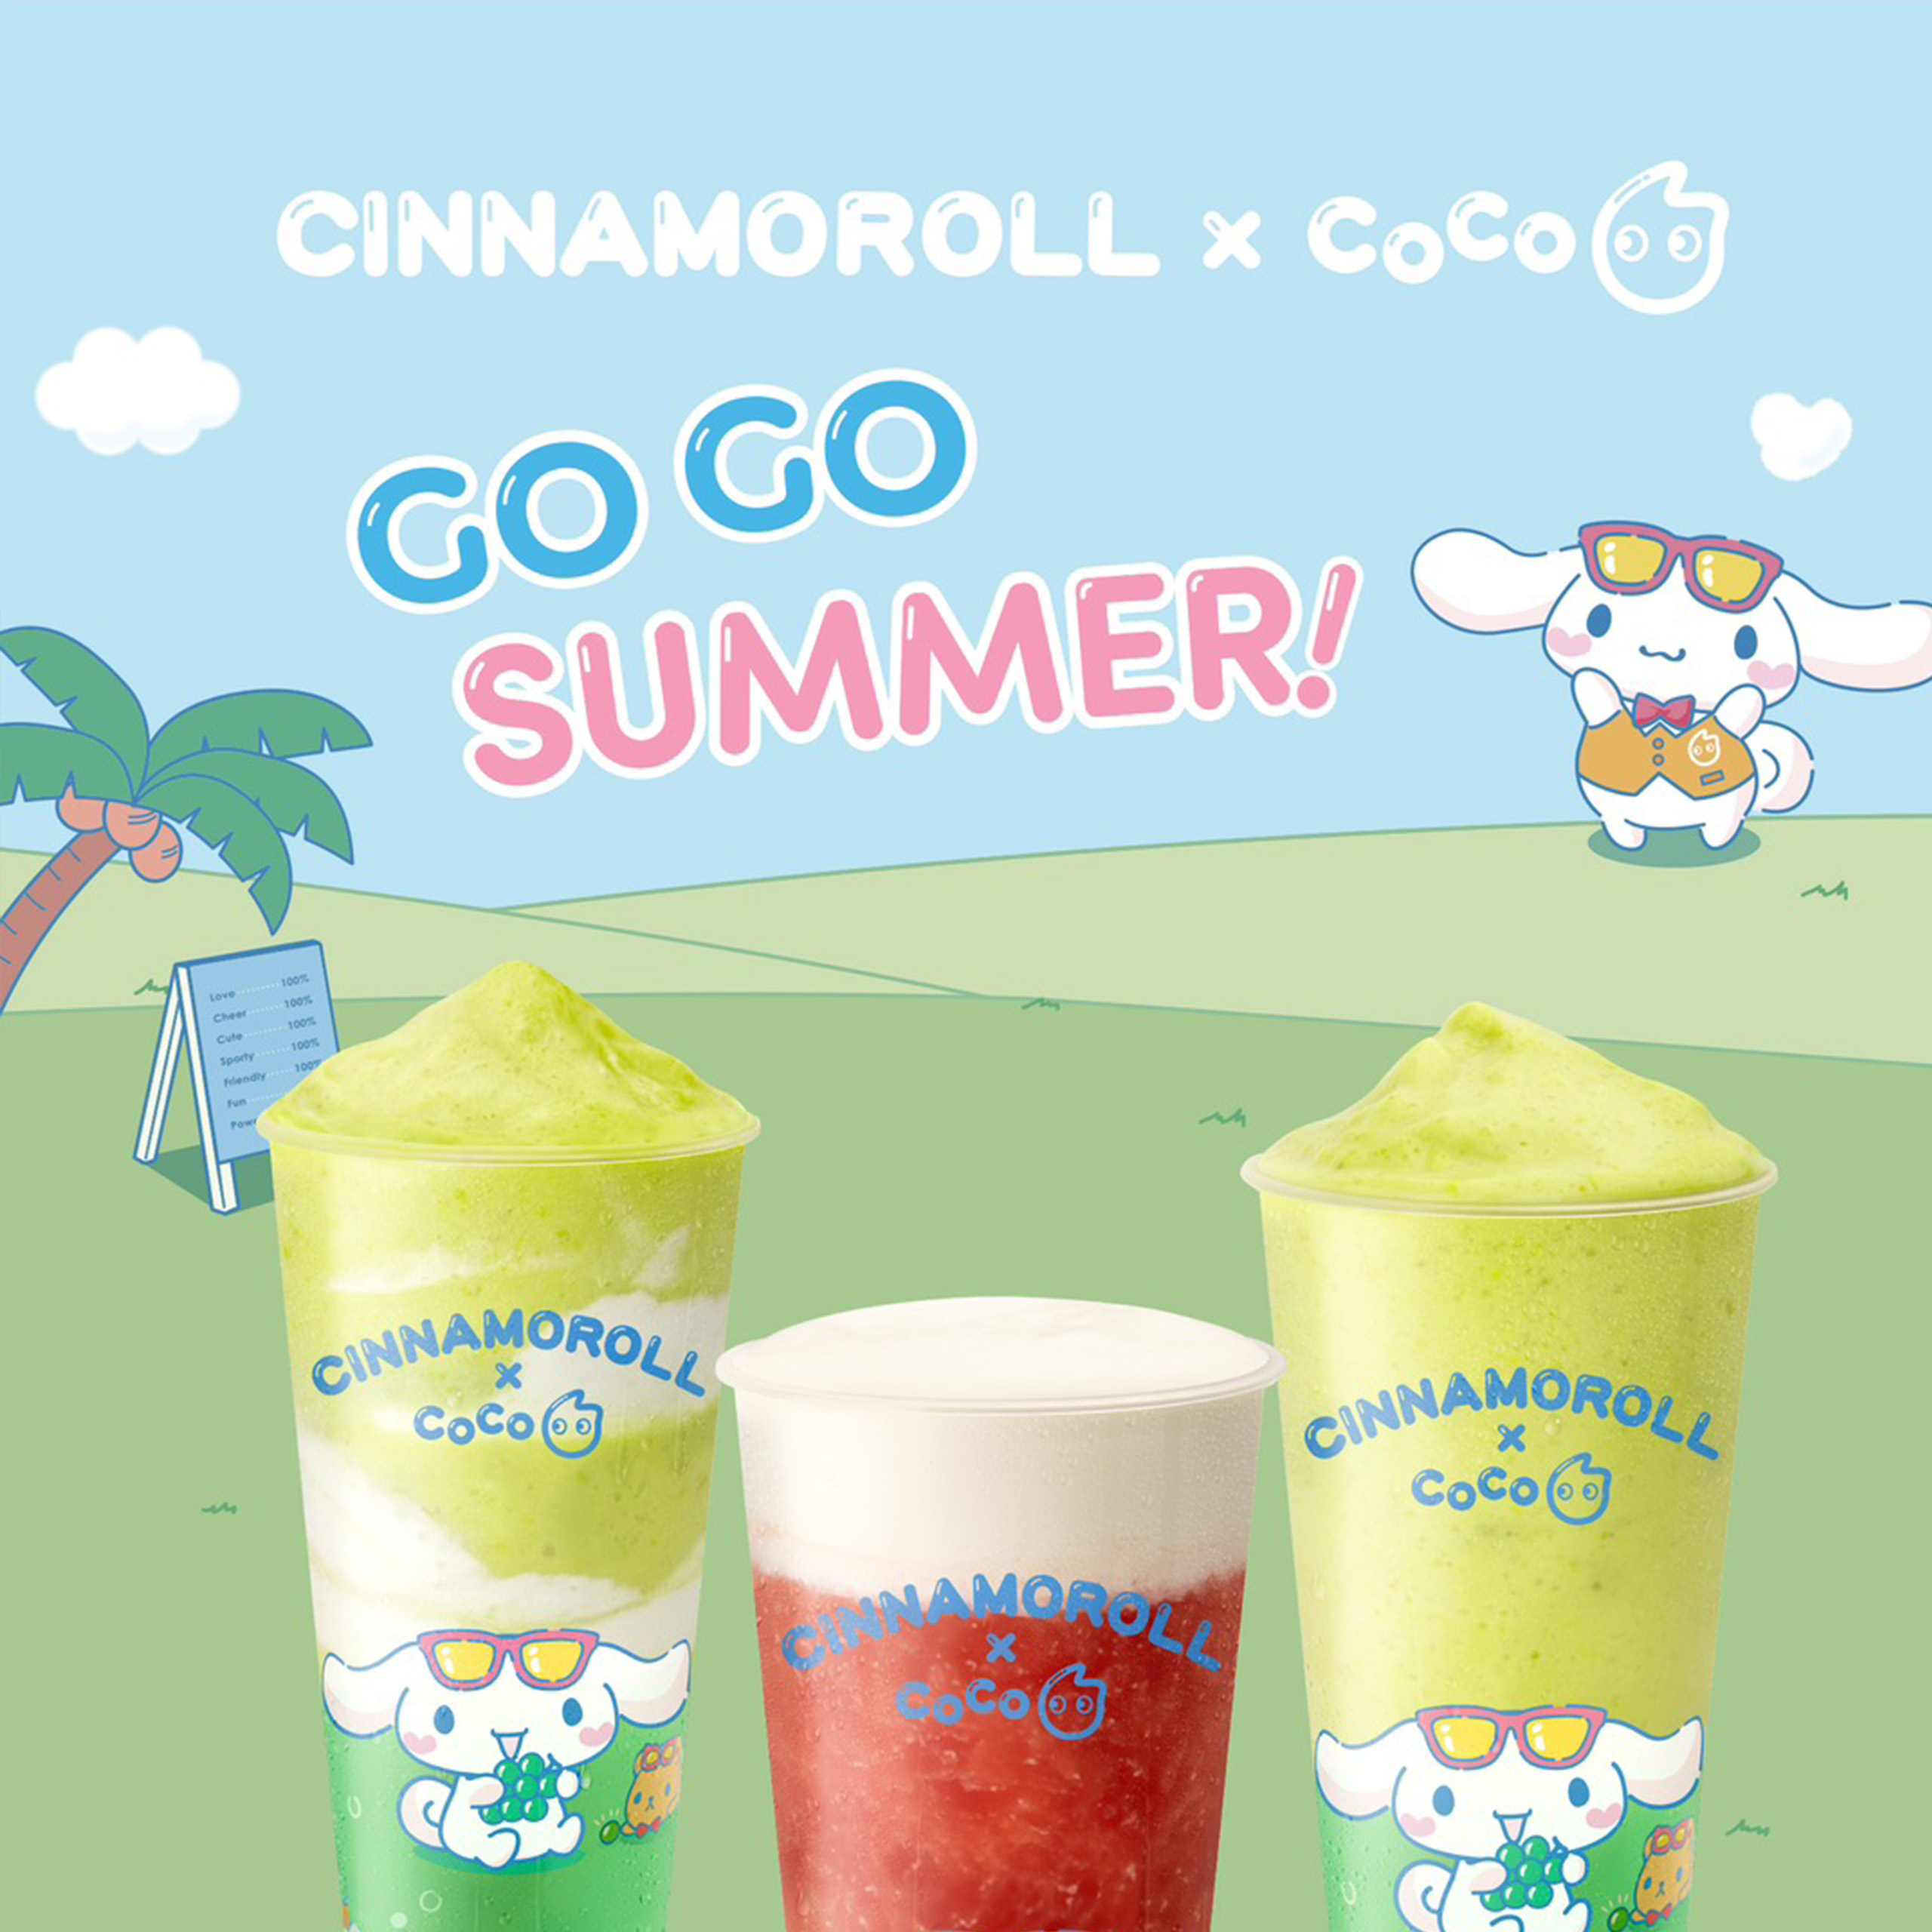 Cinnamoroll x CoCo is set to make Summer Cute and Cool